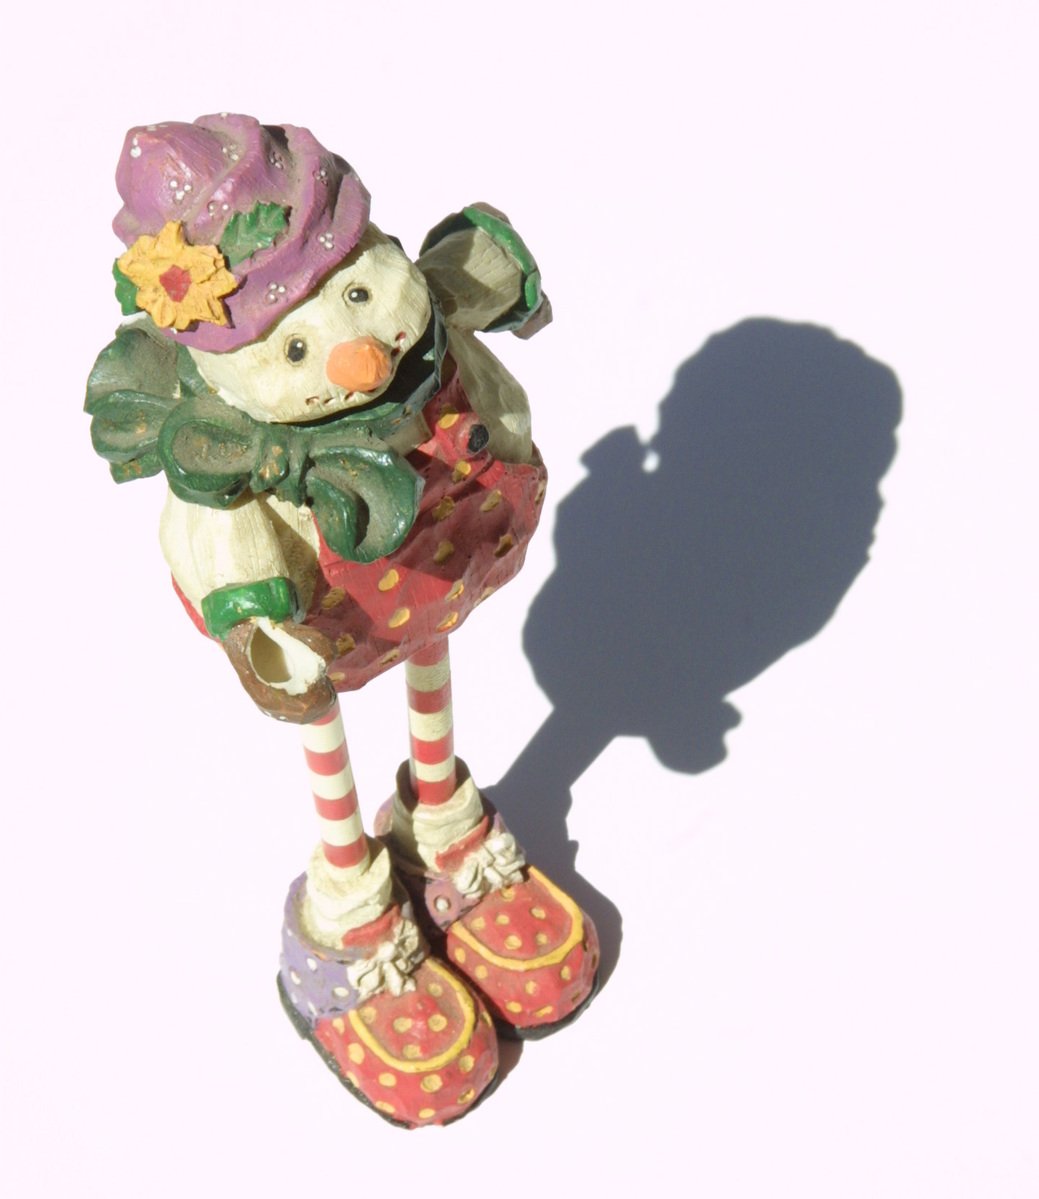 a figurine is shown, the shadow on a white background